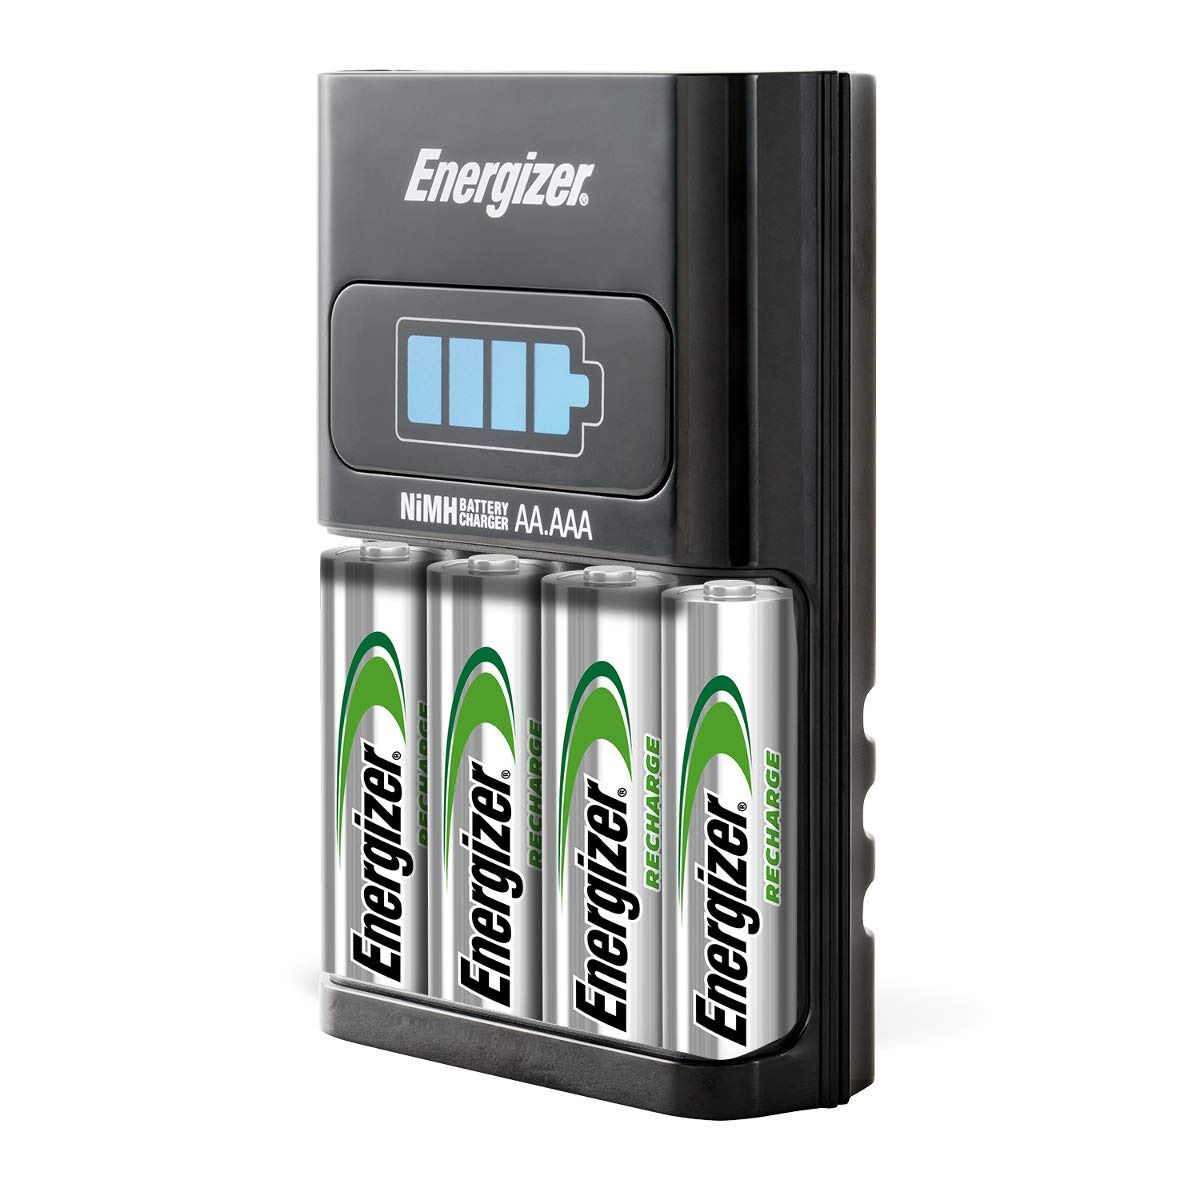 Energizer 1 Hour Battery Charger with 4x2300mAh AA NiMH